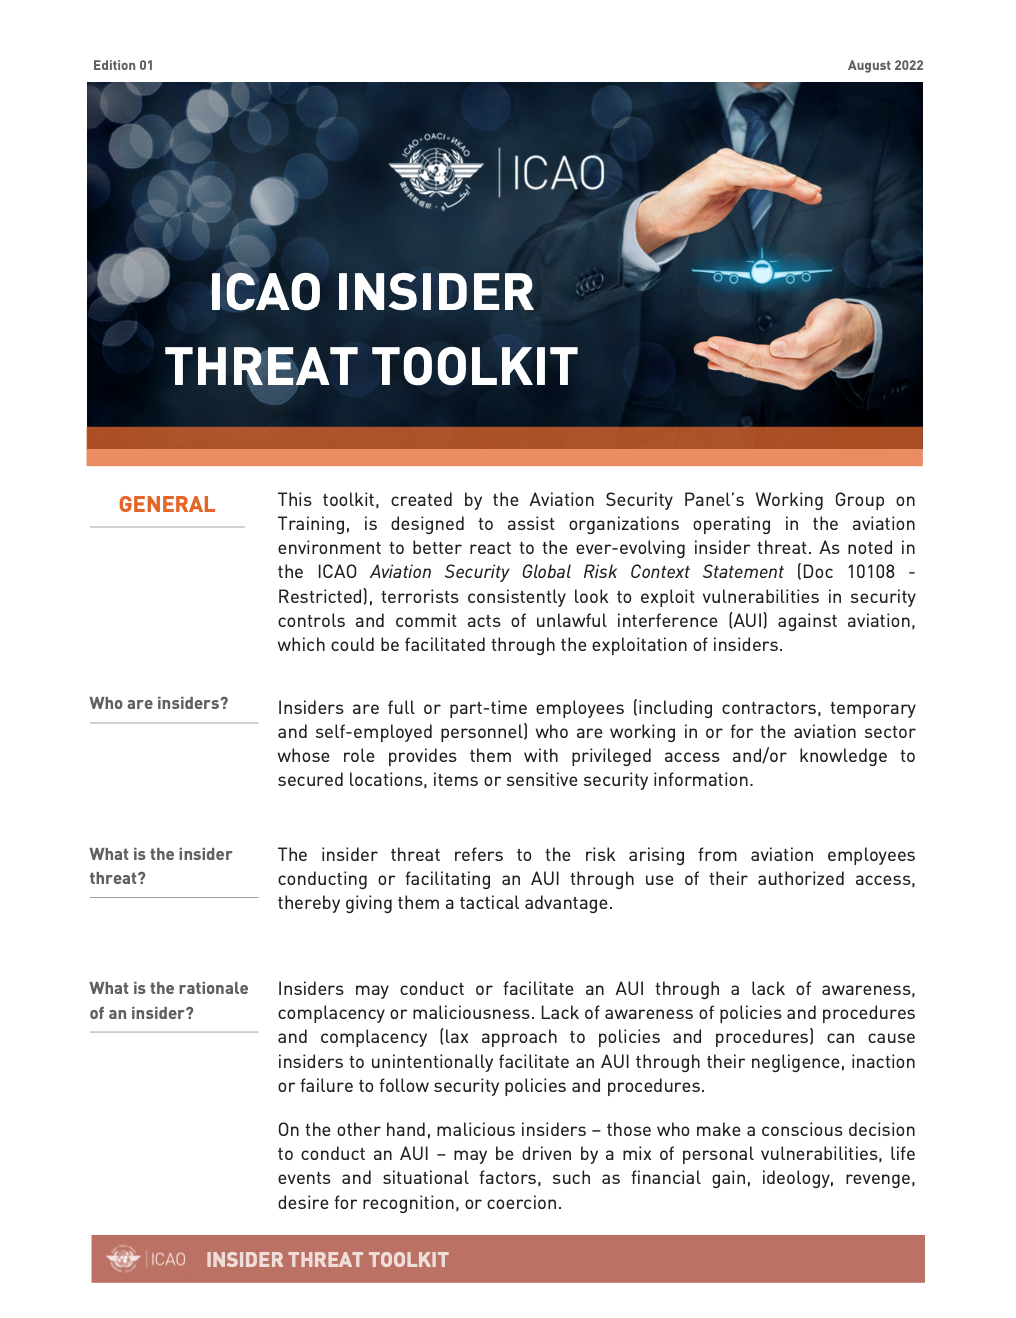 ICAO Tool Kit.png